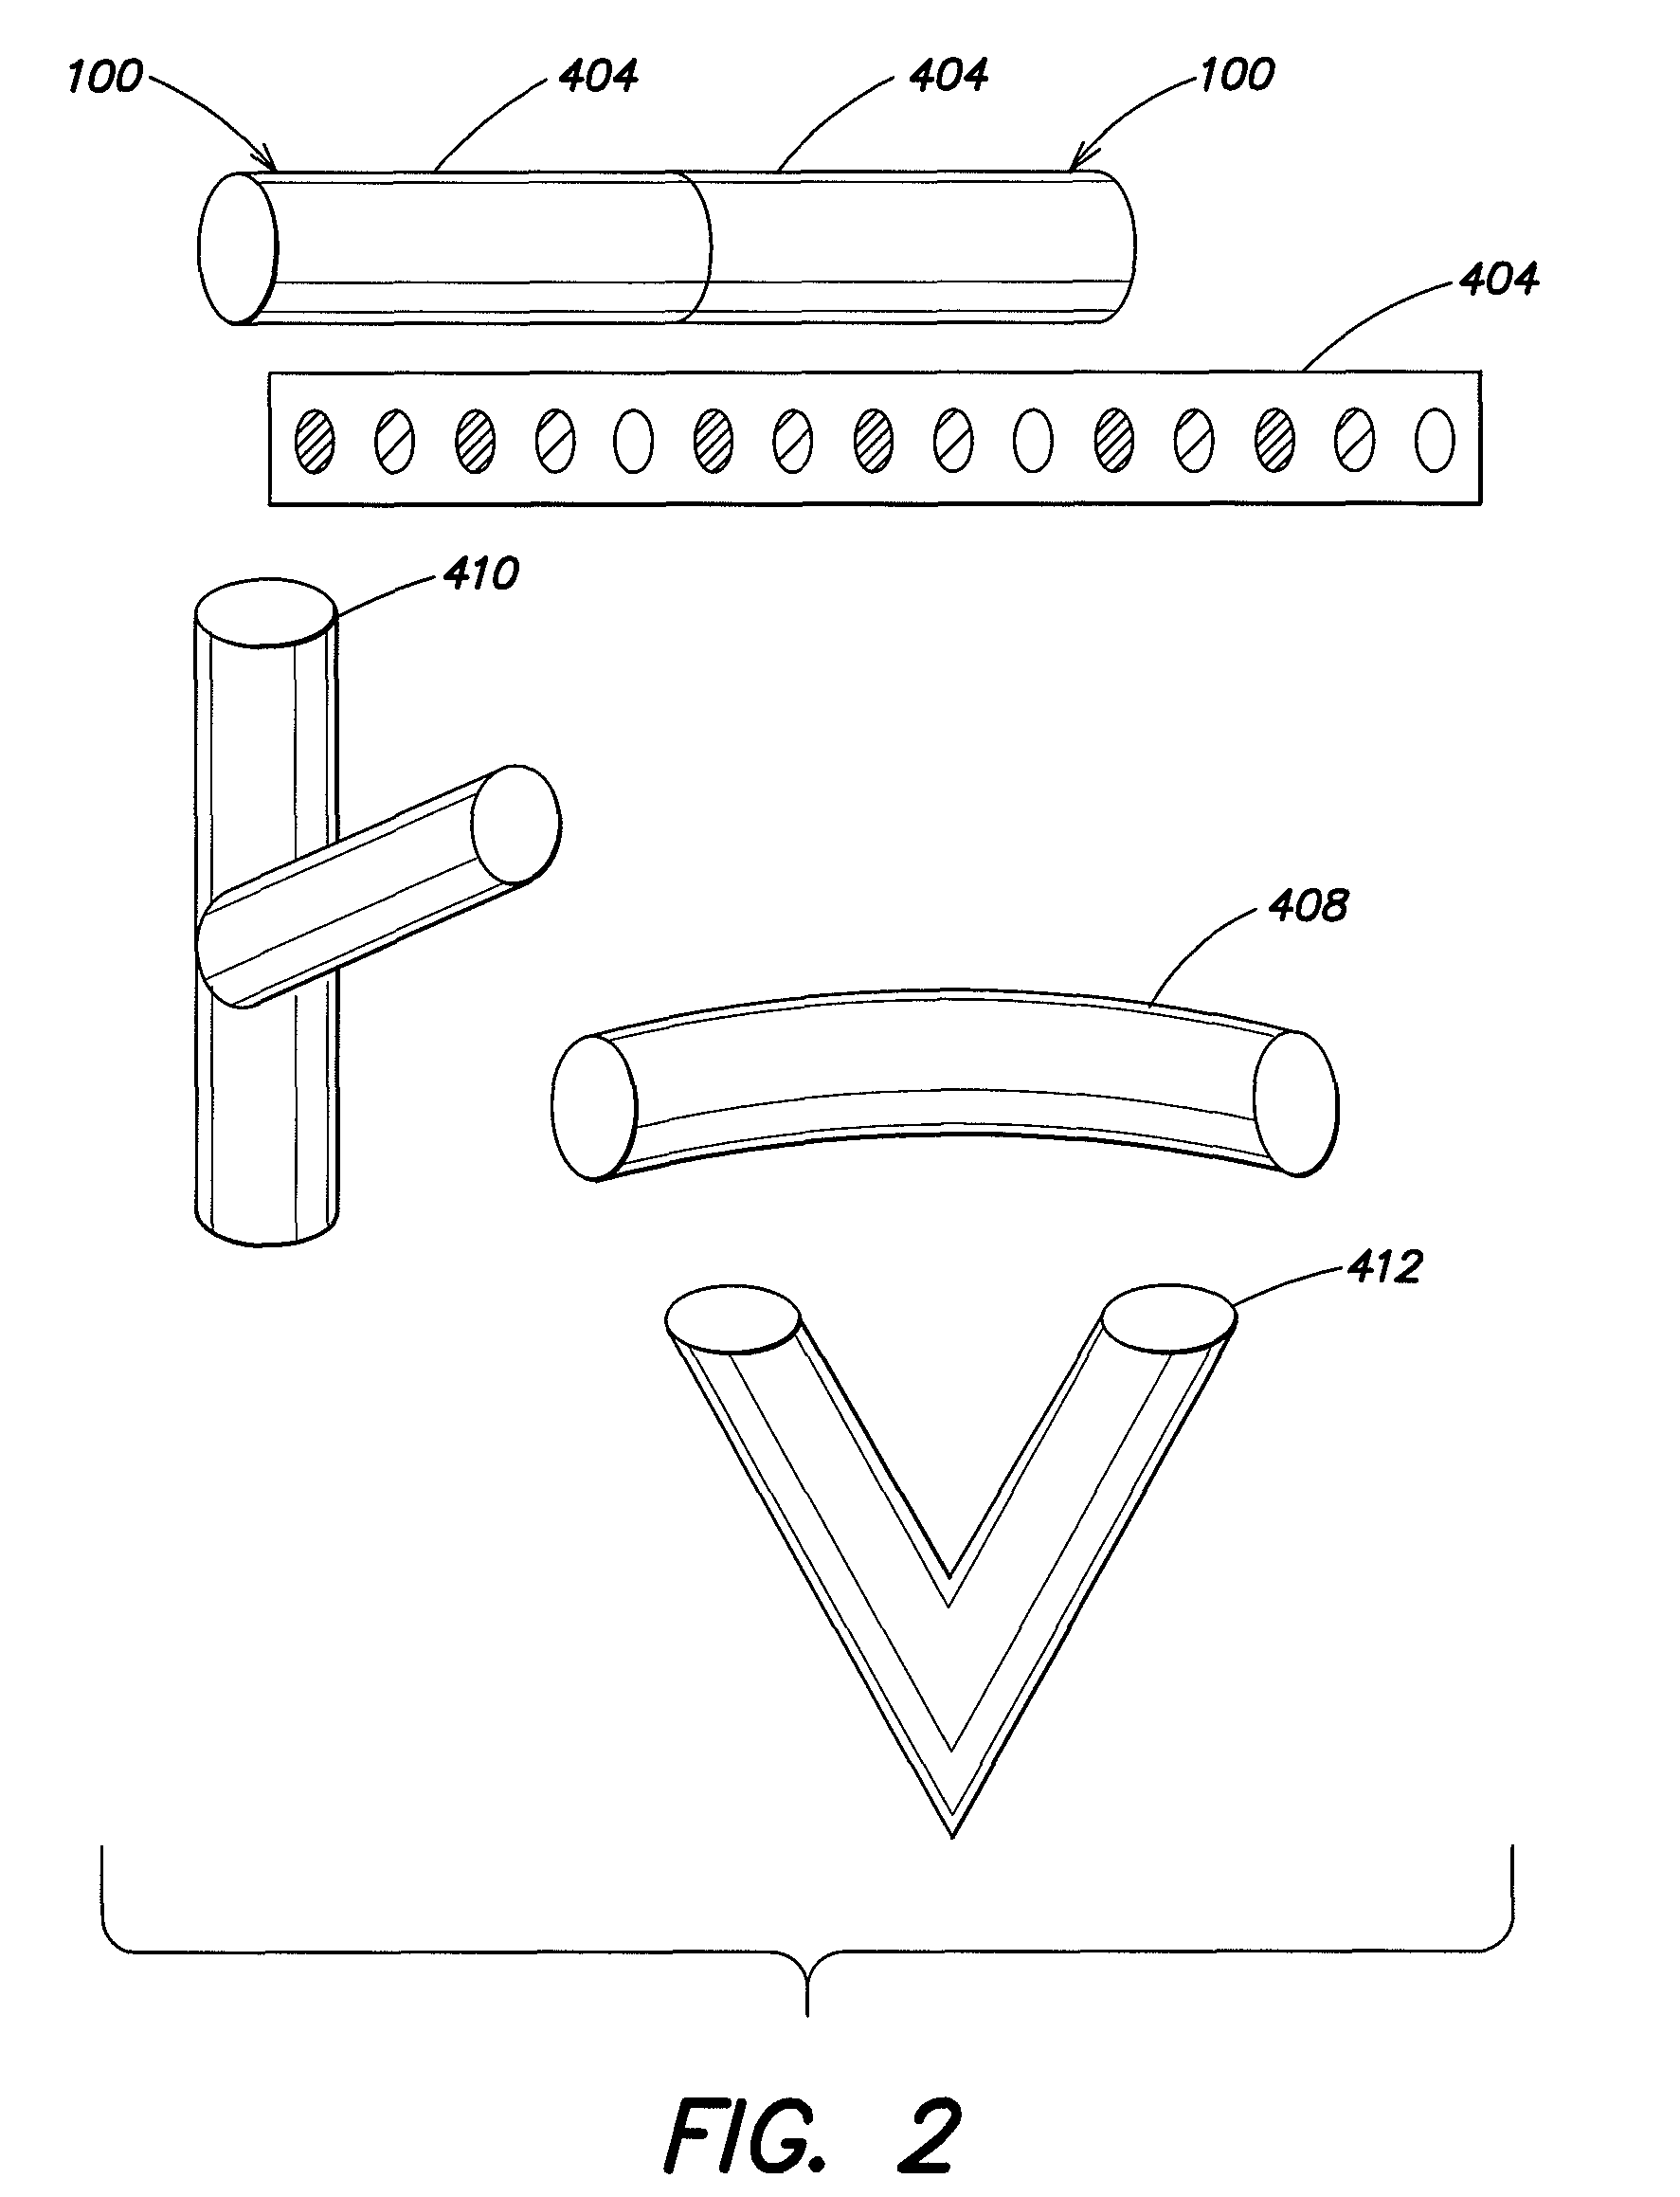 Networkable LED-based lighting fixtures and methods for powering and controlling same